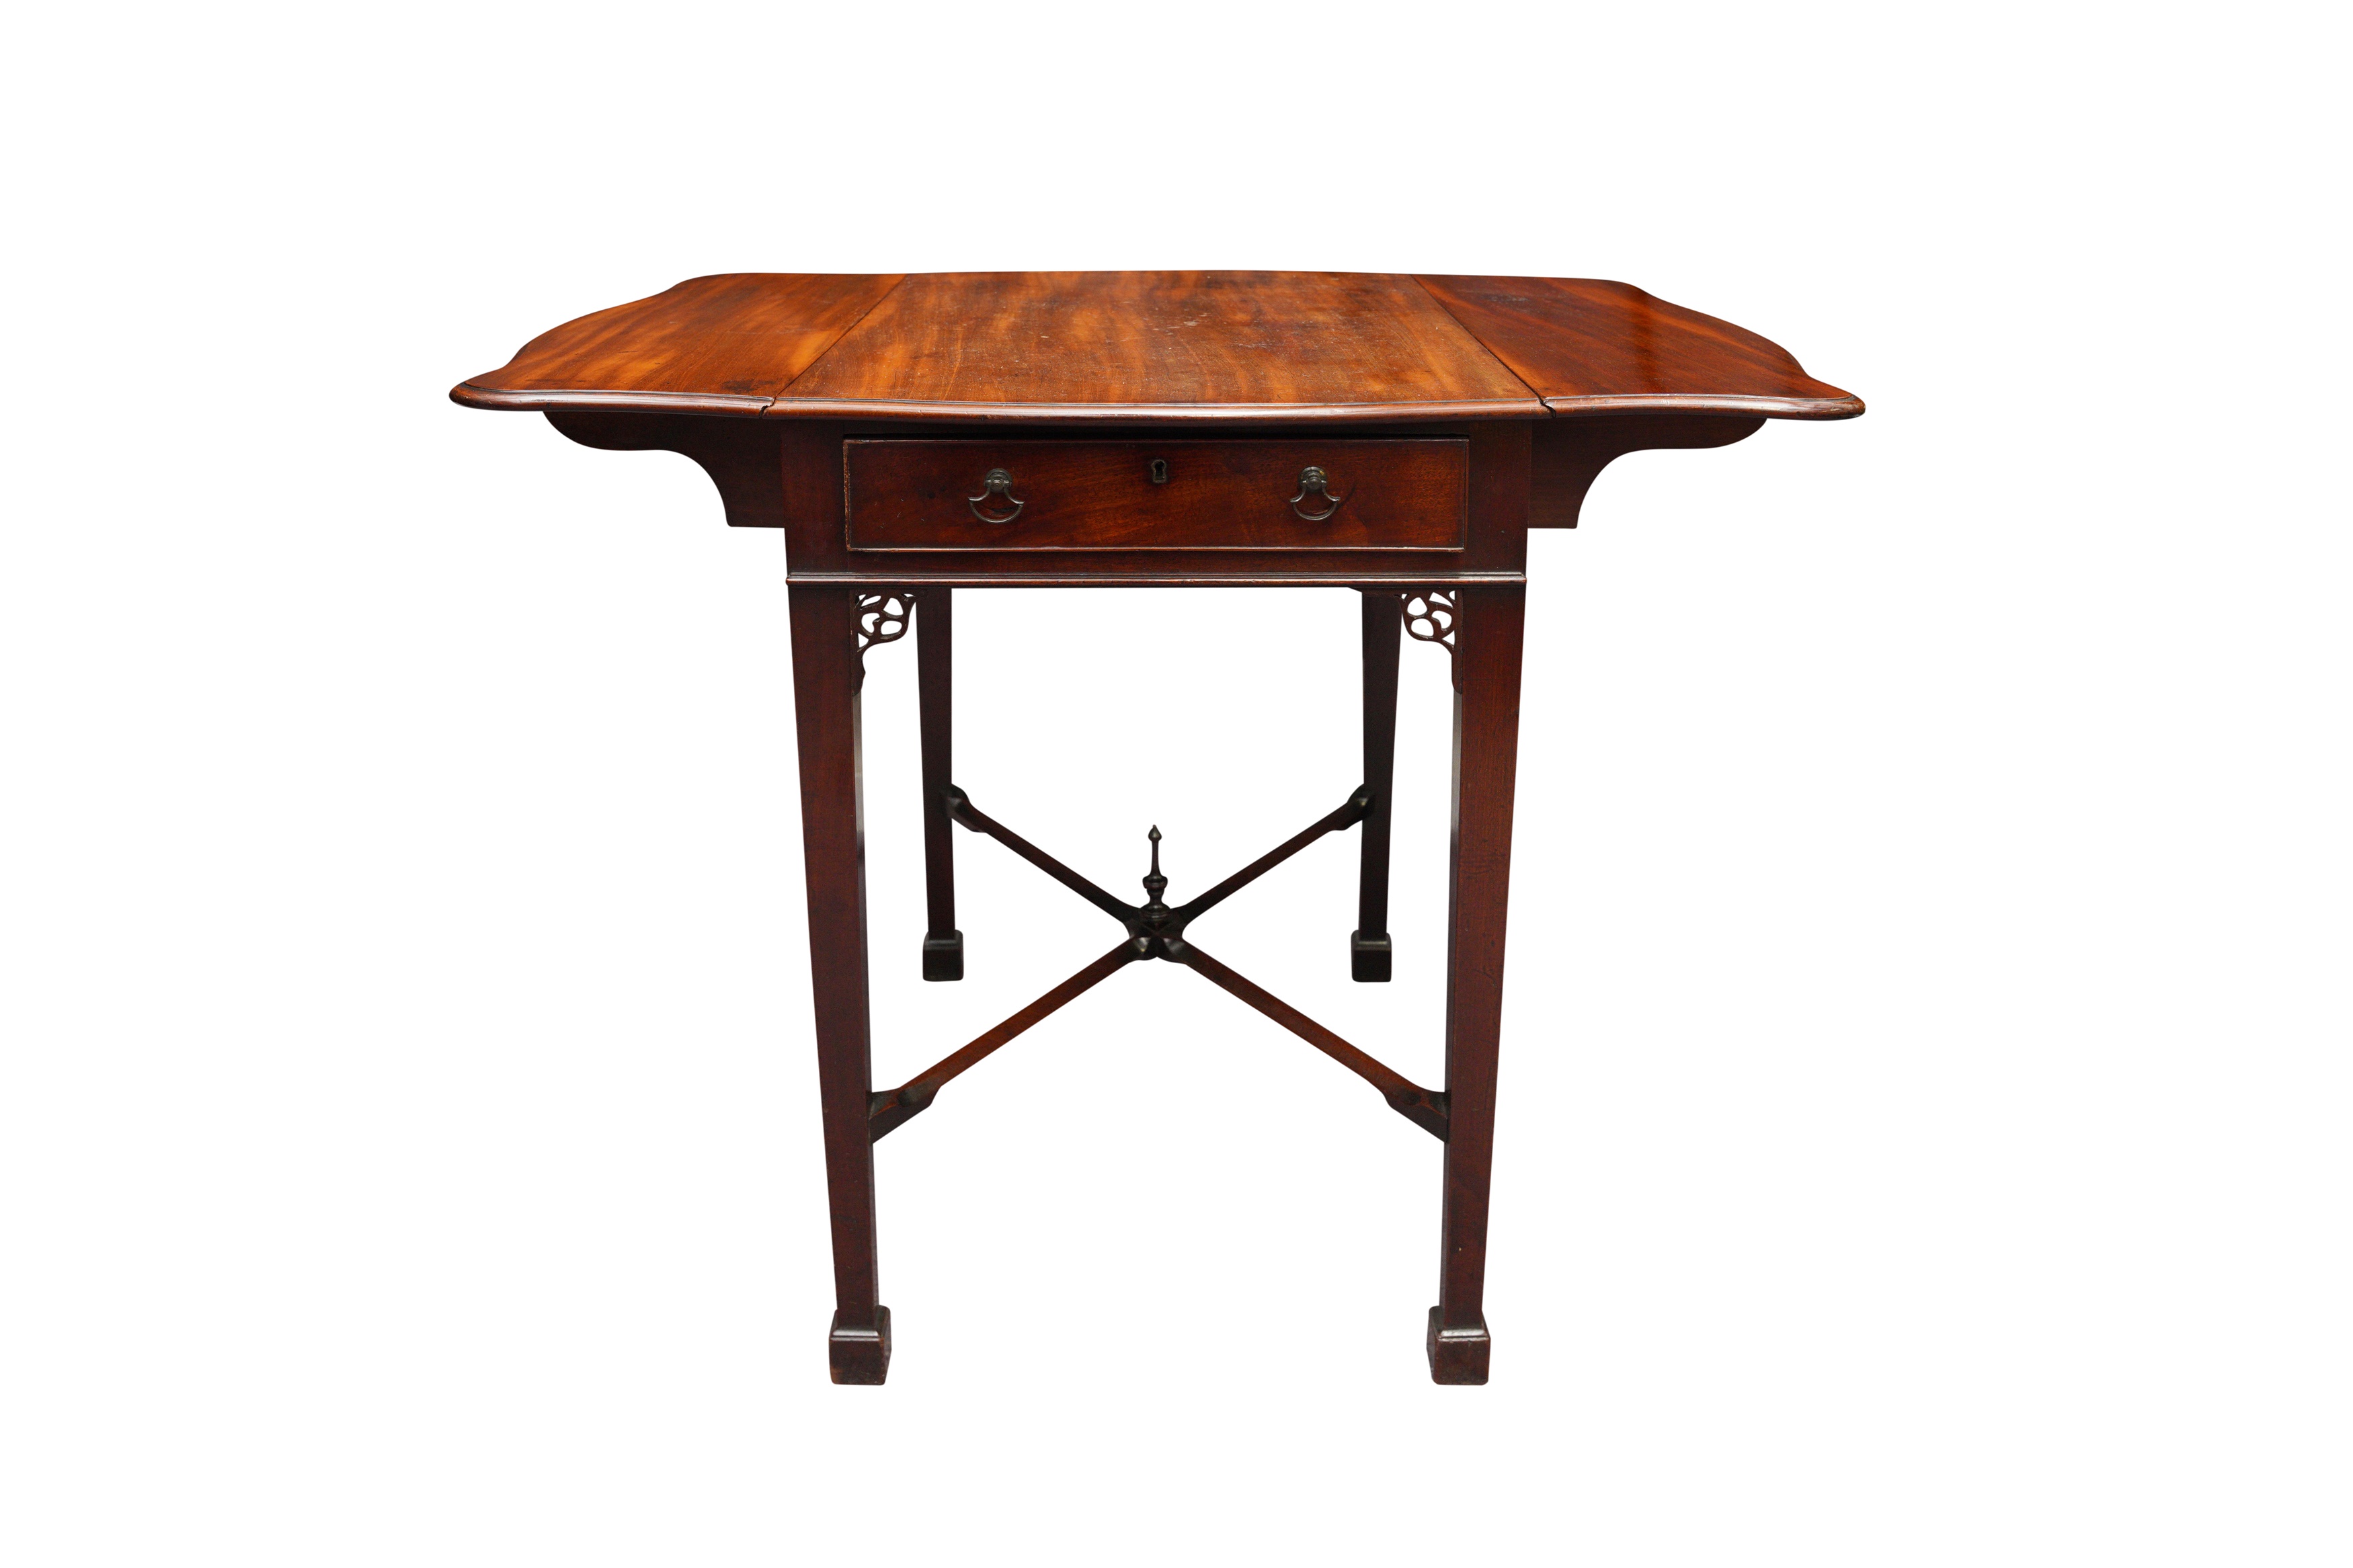 A GEORGE III MAHOGANY BUTTERFLY PEMBROKE TABLE, LATE 18TH CENTURY - Image 2 of 3